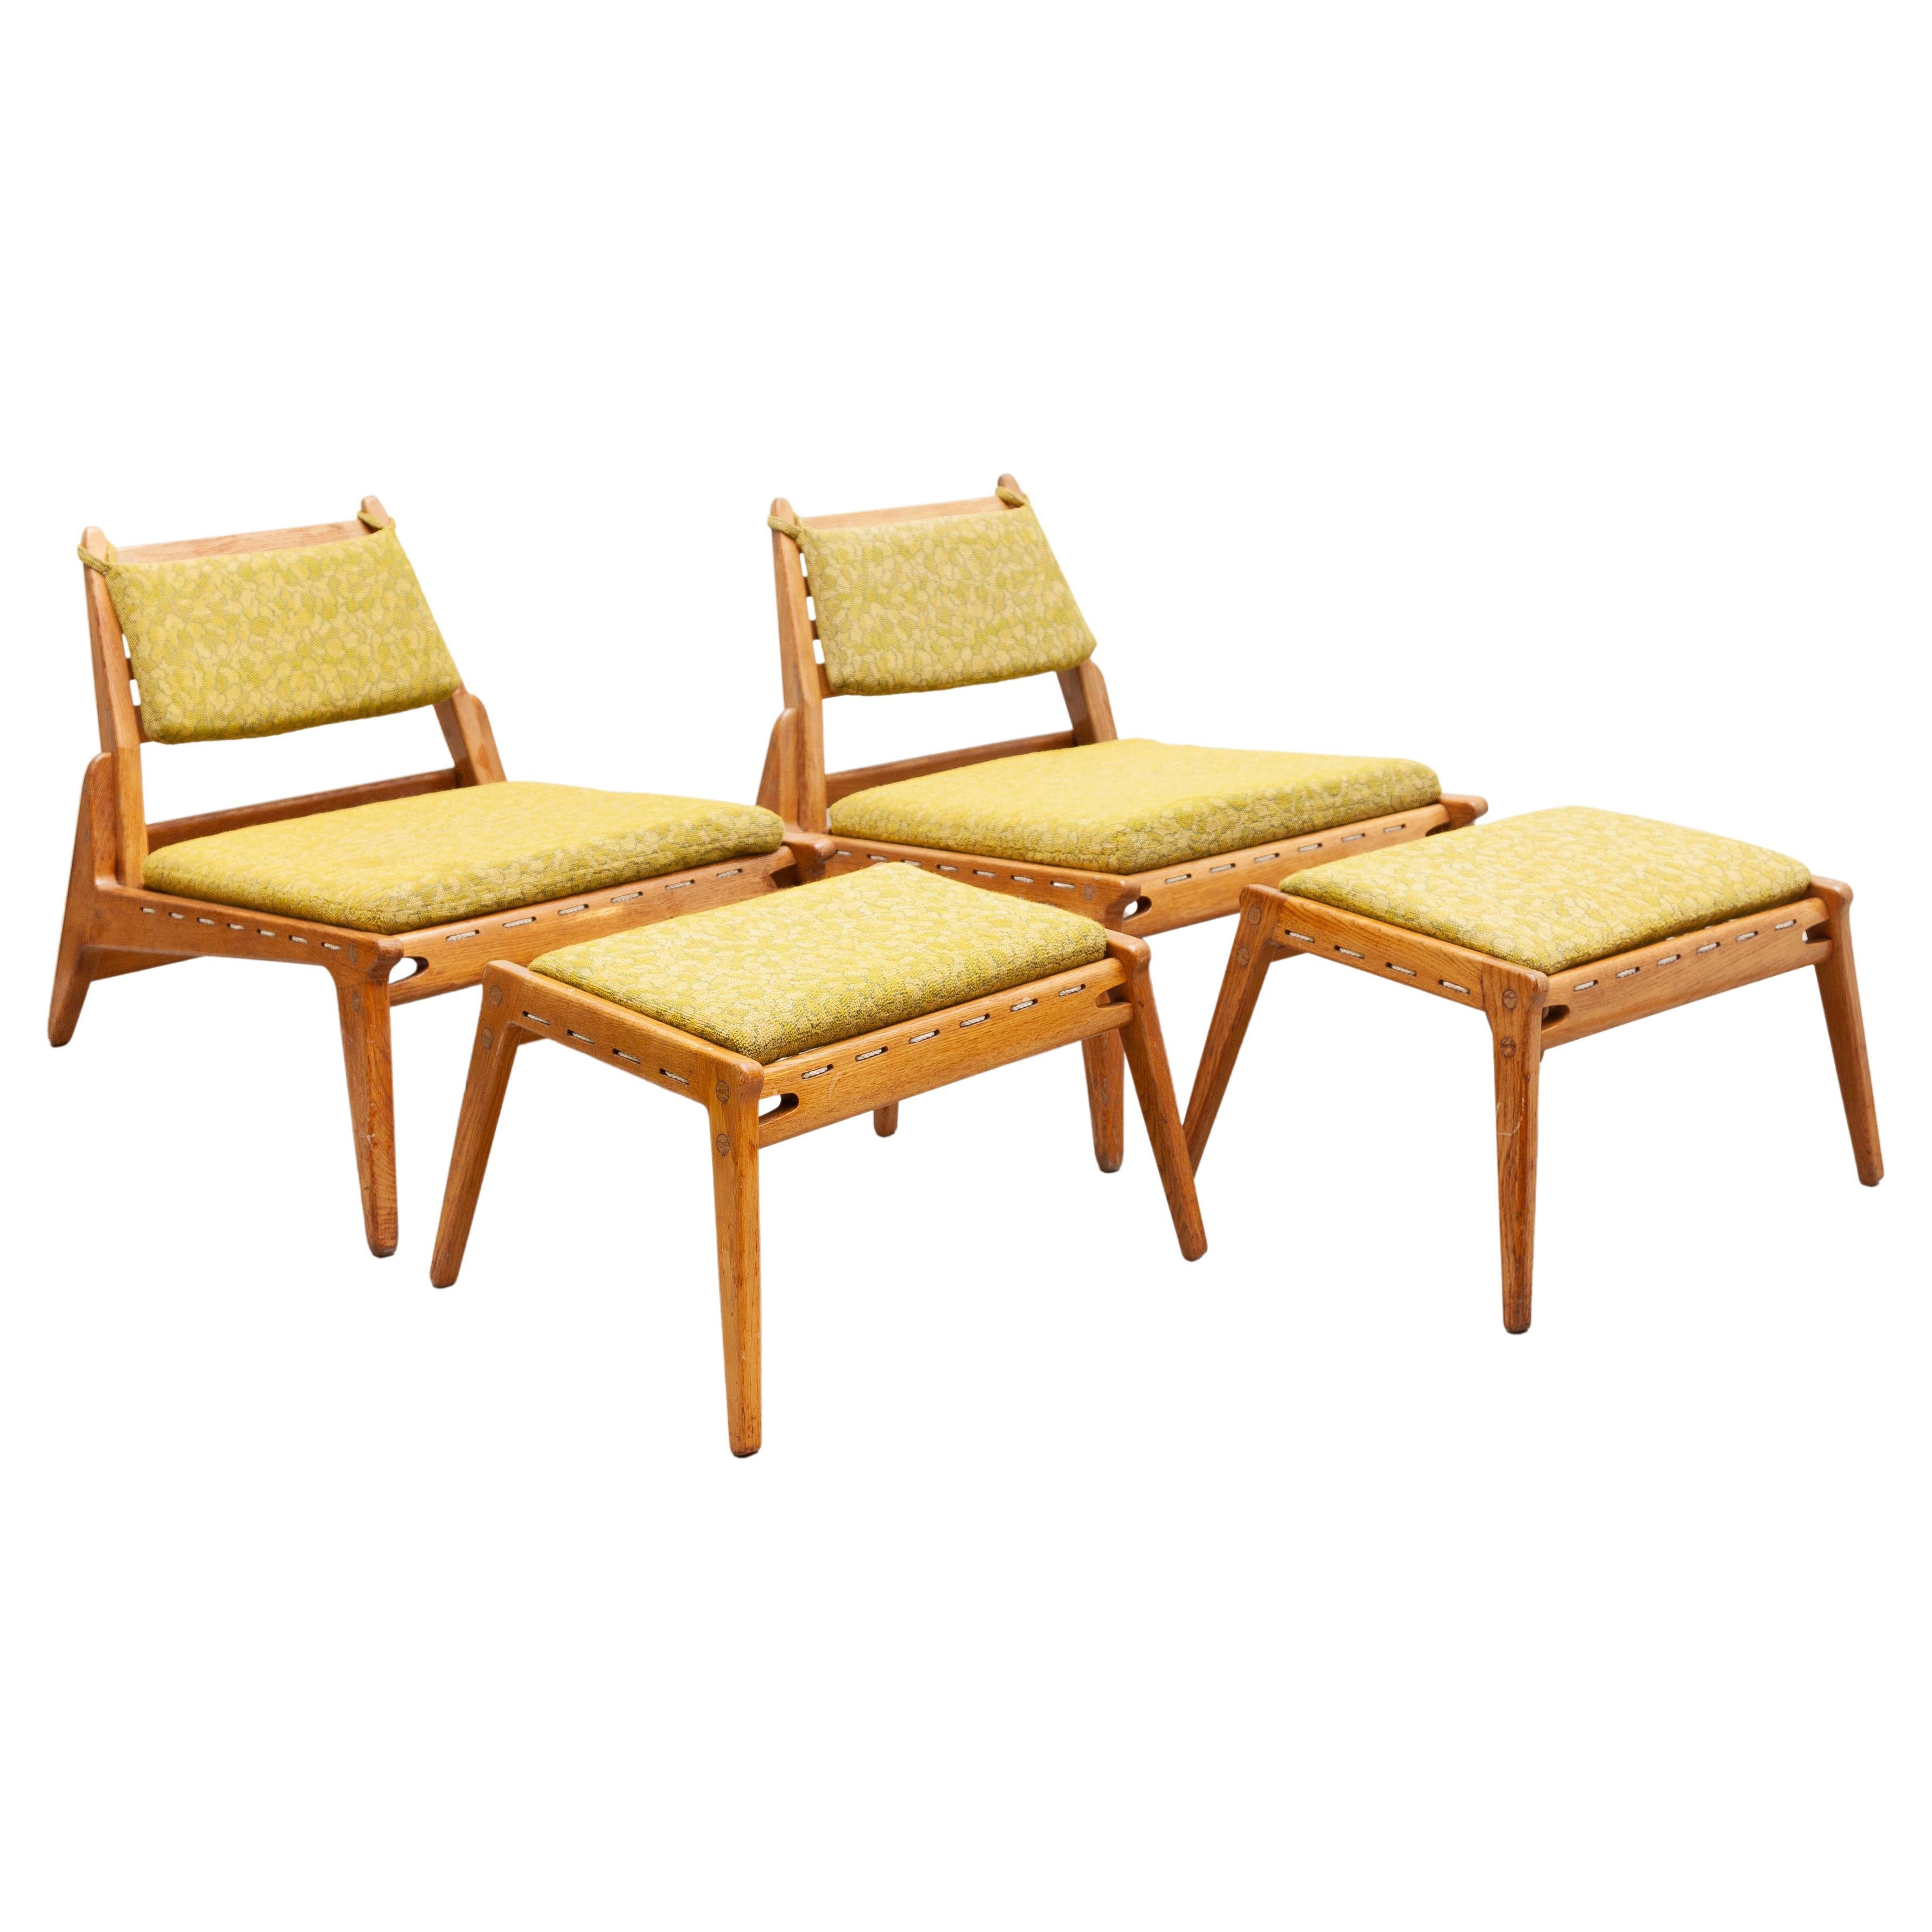 Set of Two Hunting Lounge Chairs & Ottoman by Werkstätten Hellerau 1950s Germany